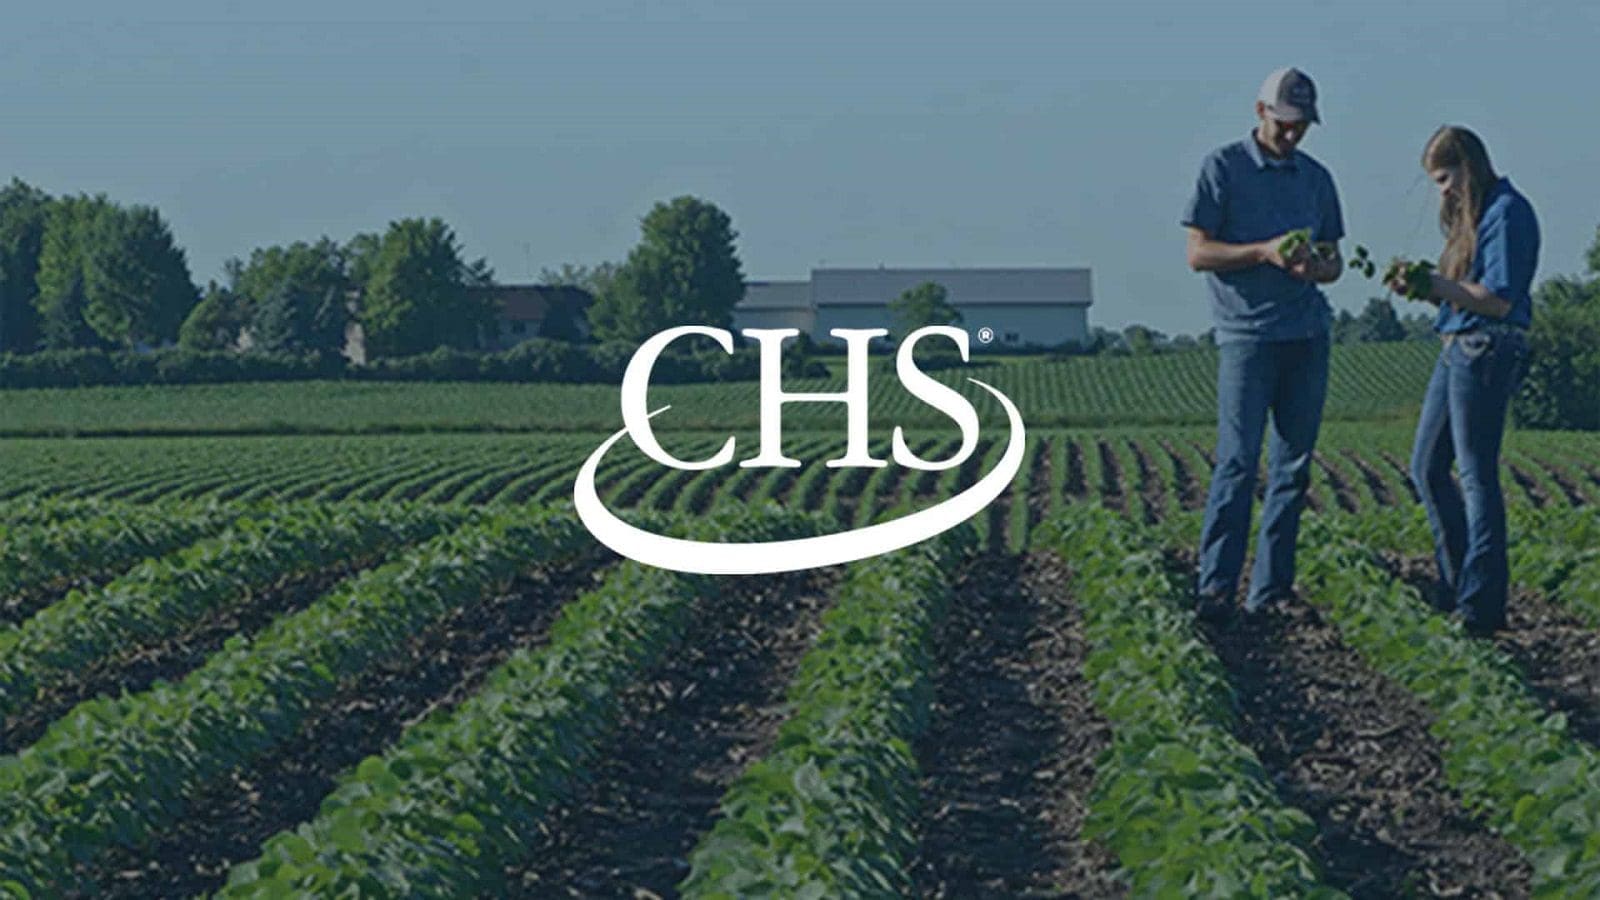 Global demand for energy and oilseeds products drives CHS Q3 earnings